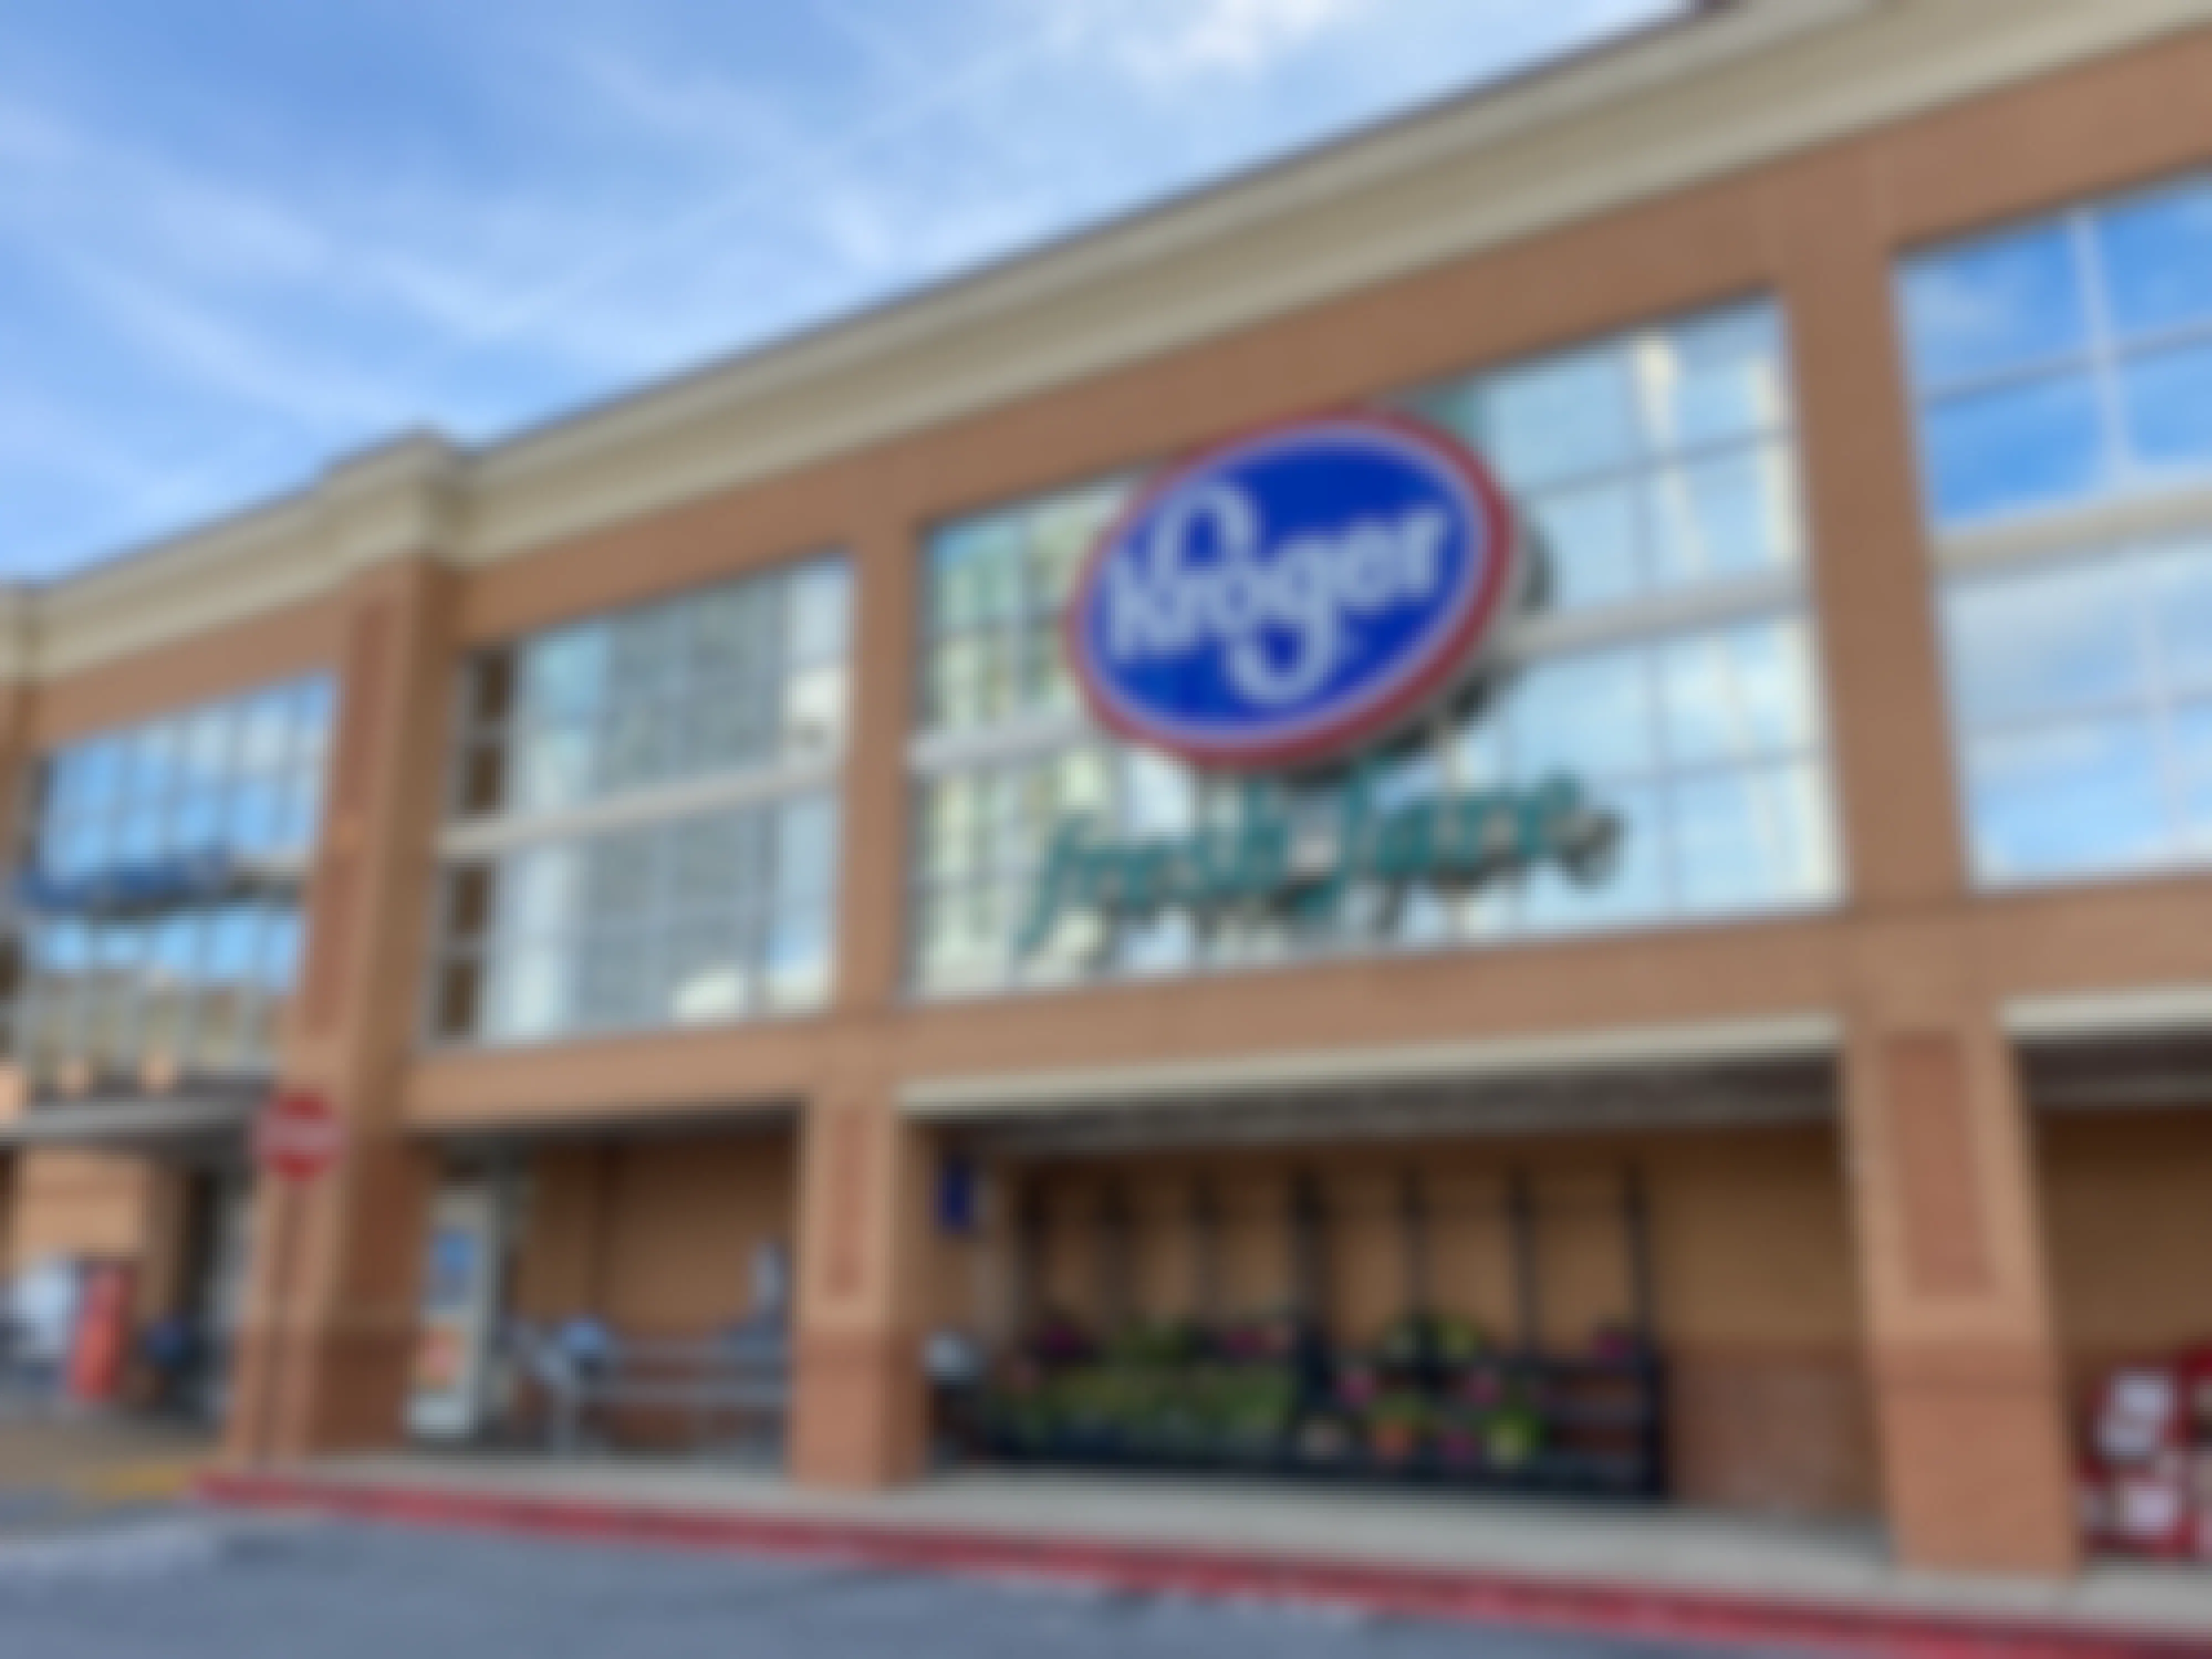 The exterior of the Kroger grocery store in the Buckhead District of Atlanta, GA